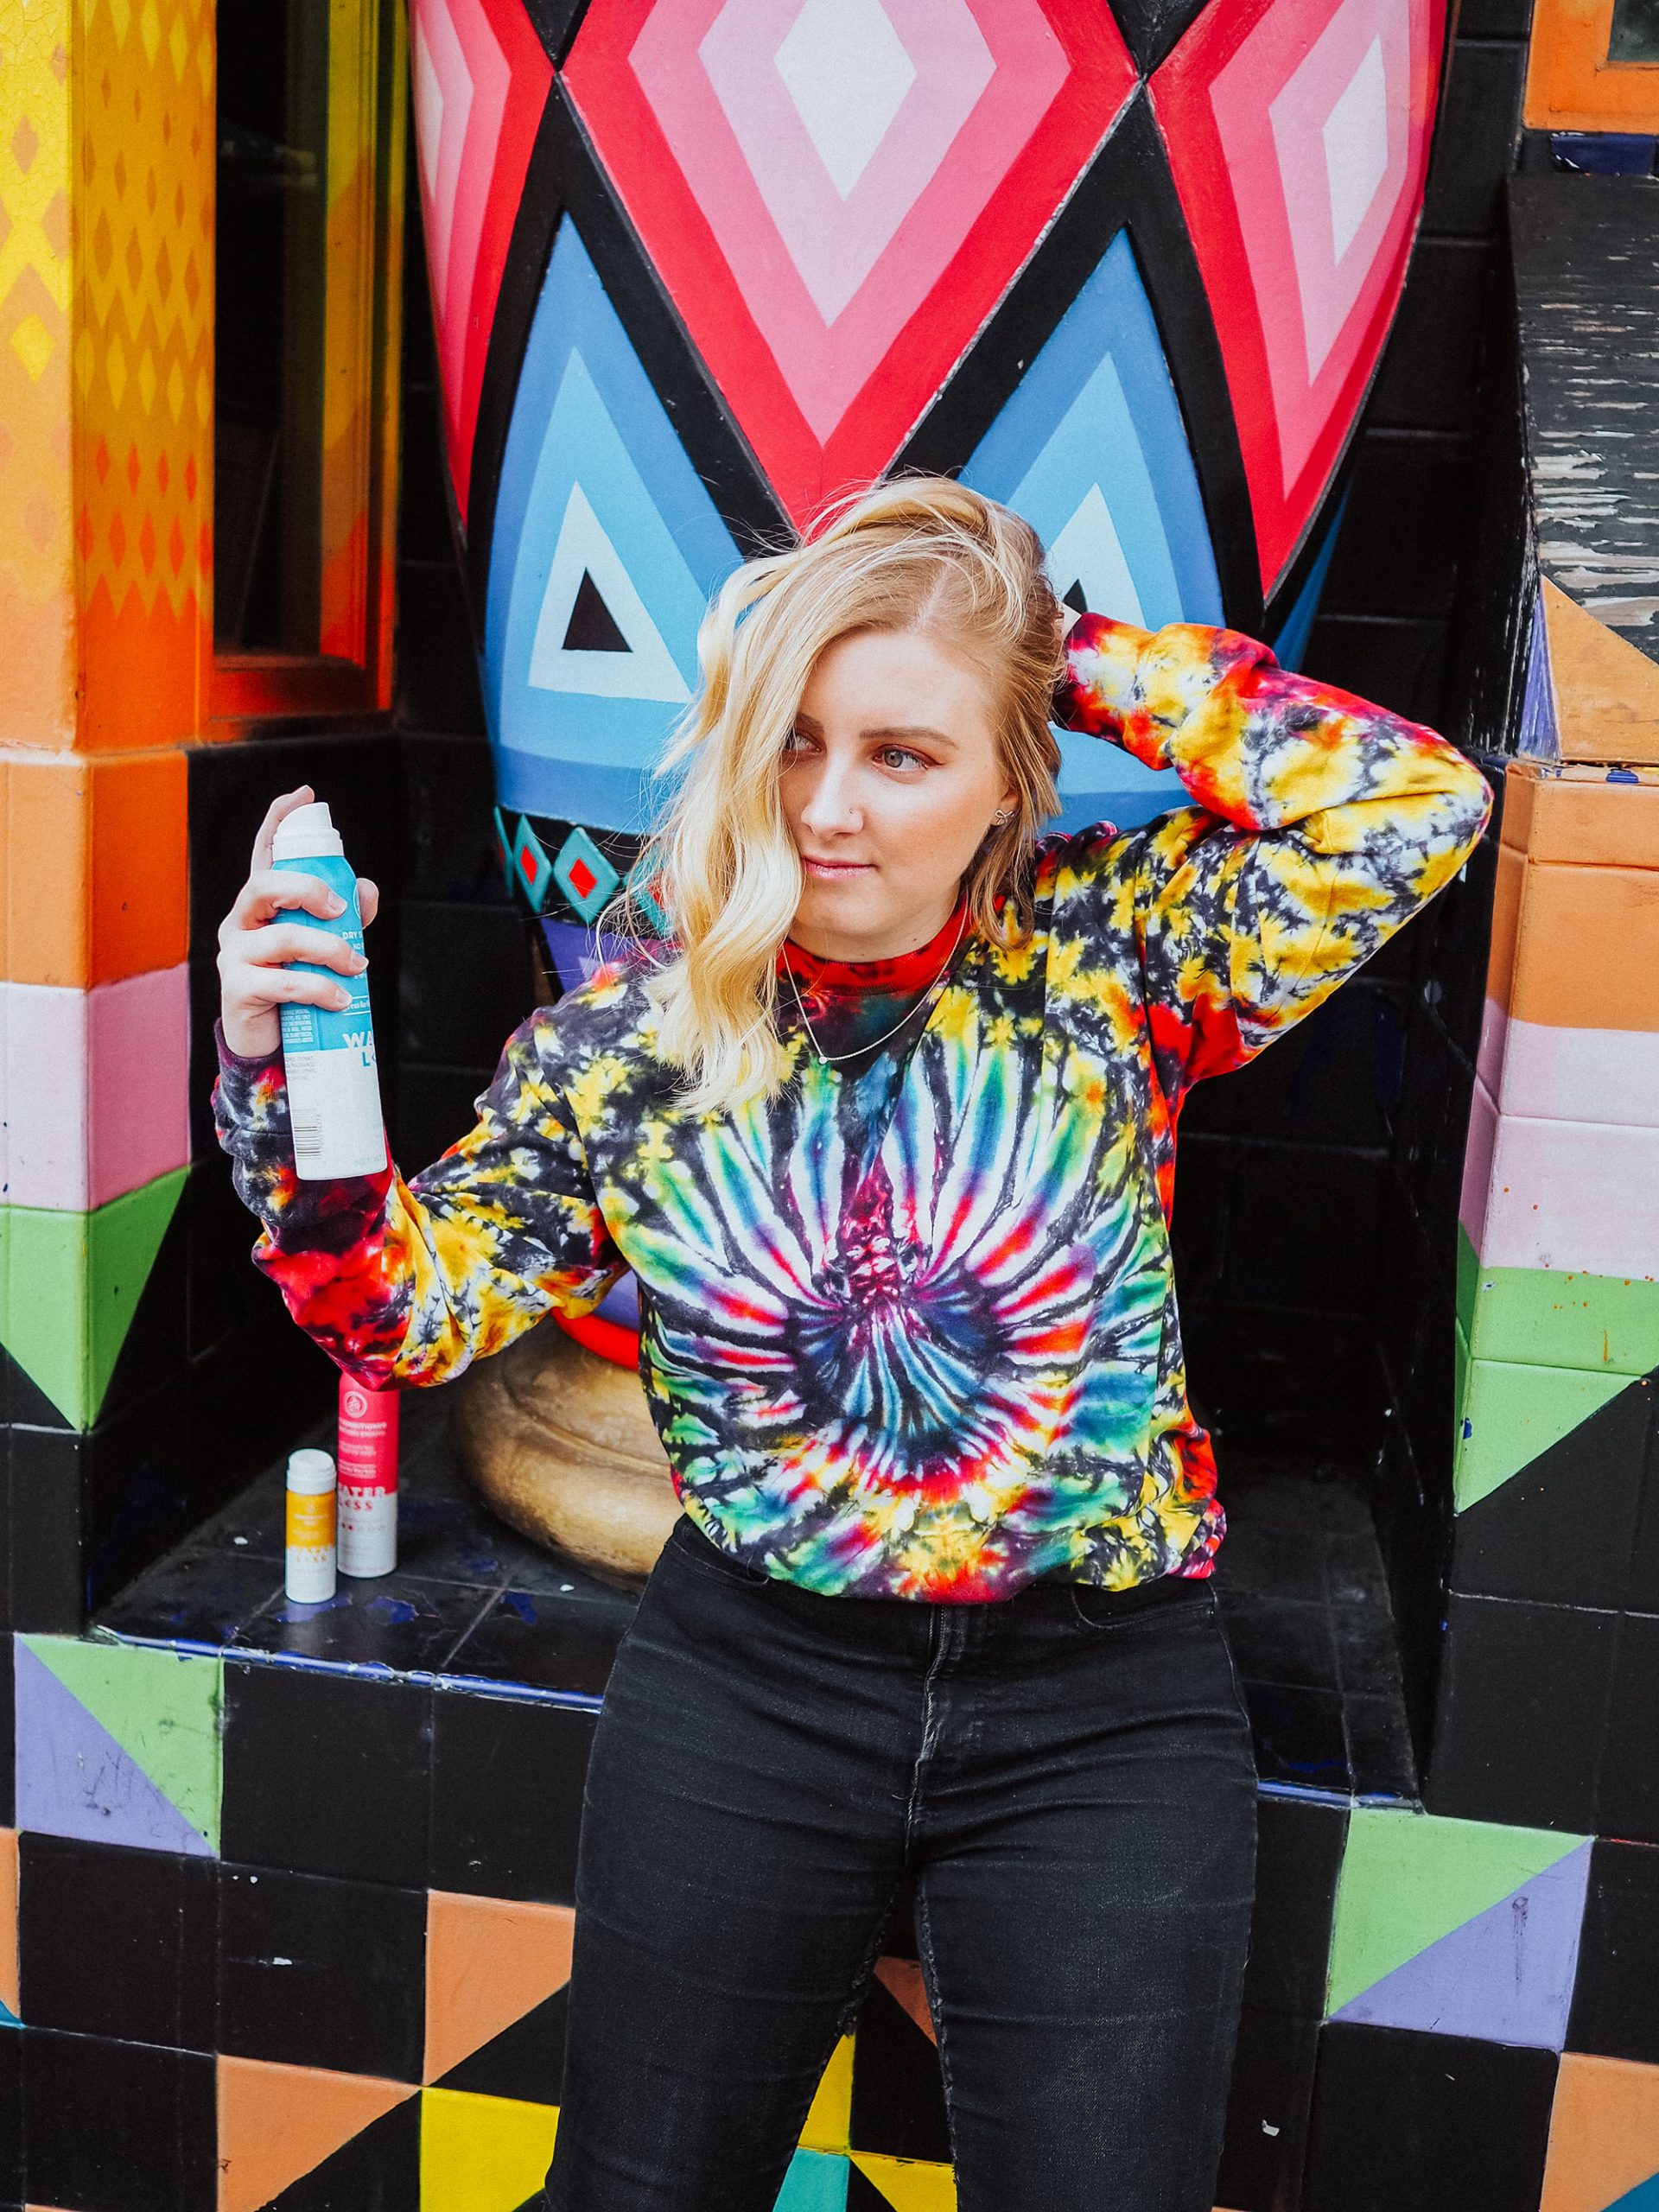 Lifestyle blogger Kelsey from Blondes & Bagels reviews the new Waterl<ss hair care range to see if their dry shampoo line really works!